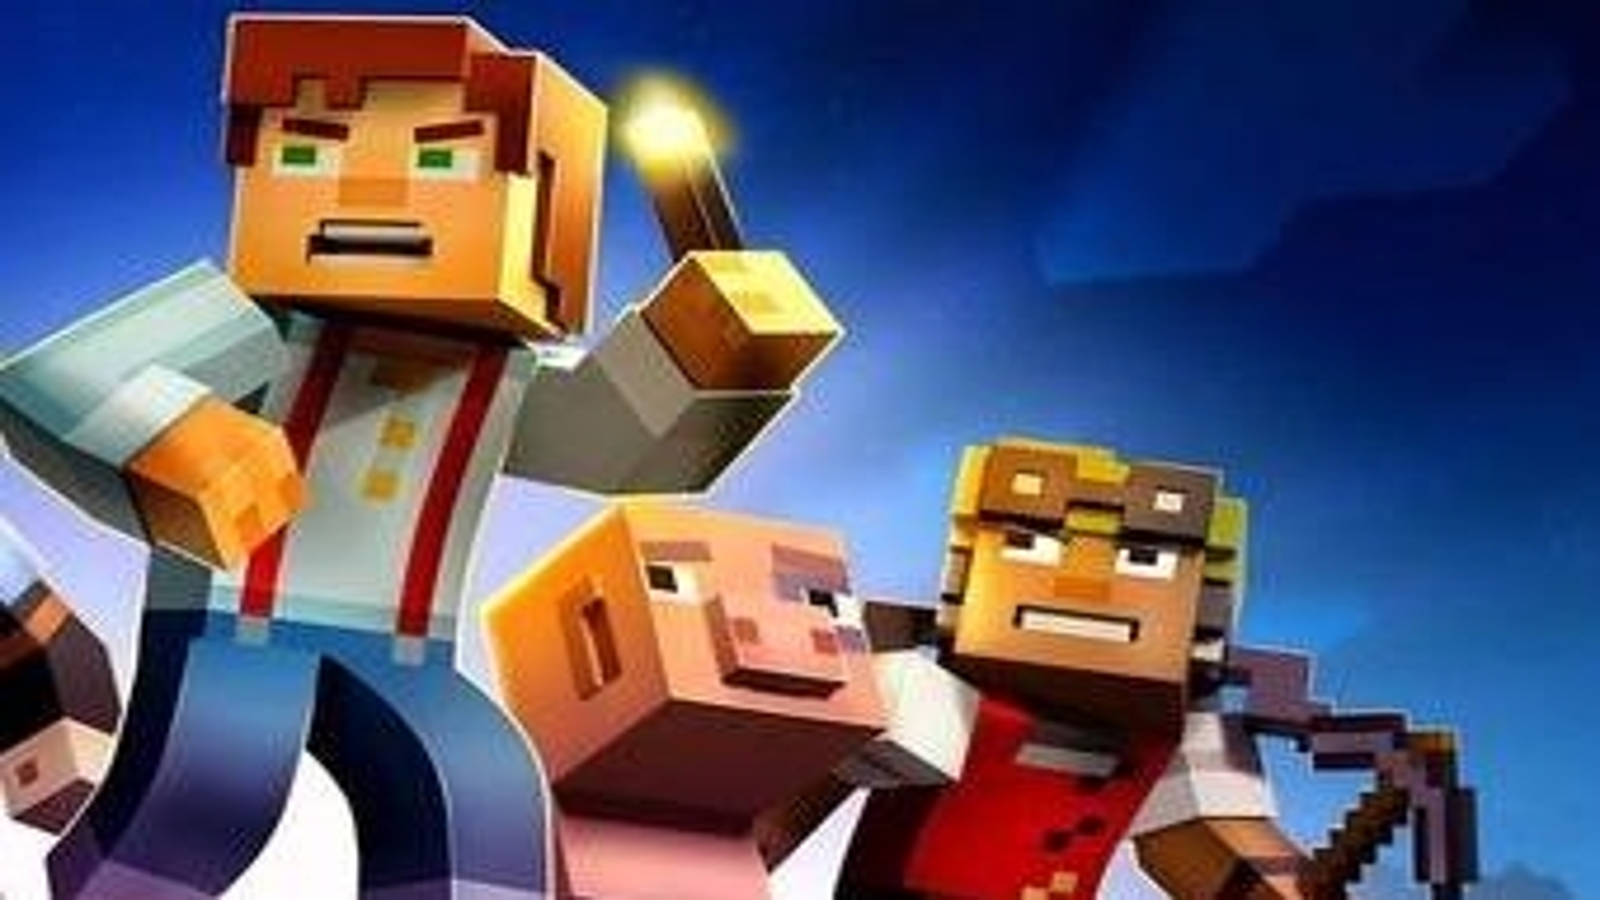 Minecraft: Story Mode – Delisted Games